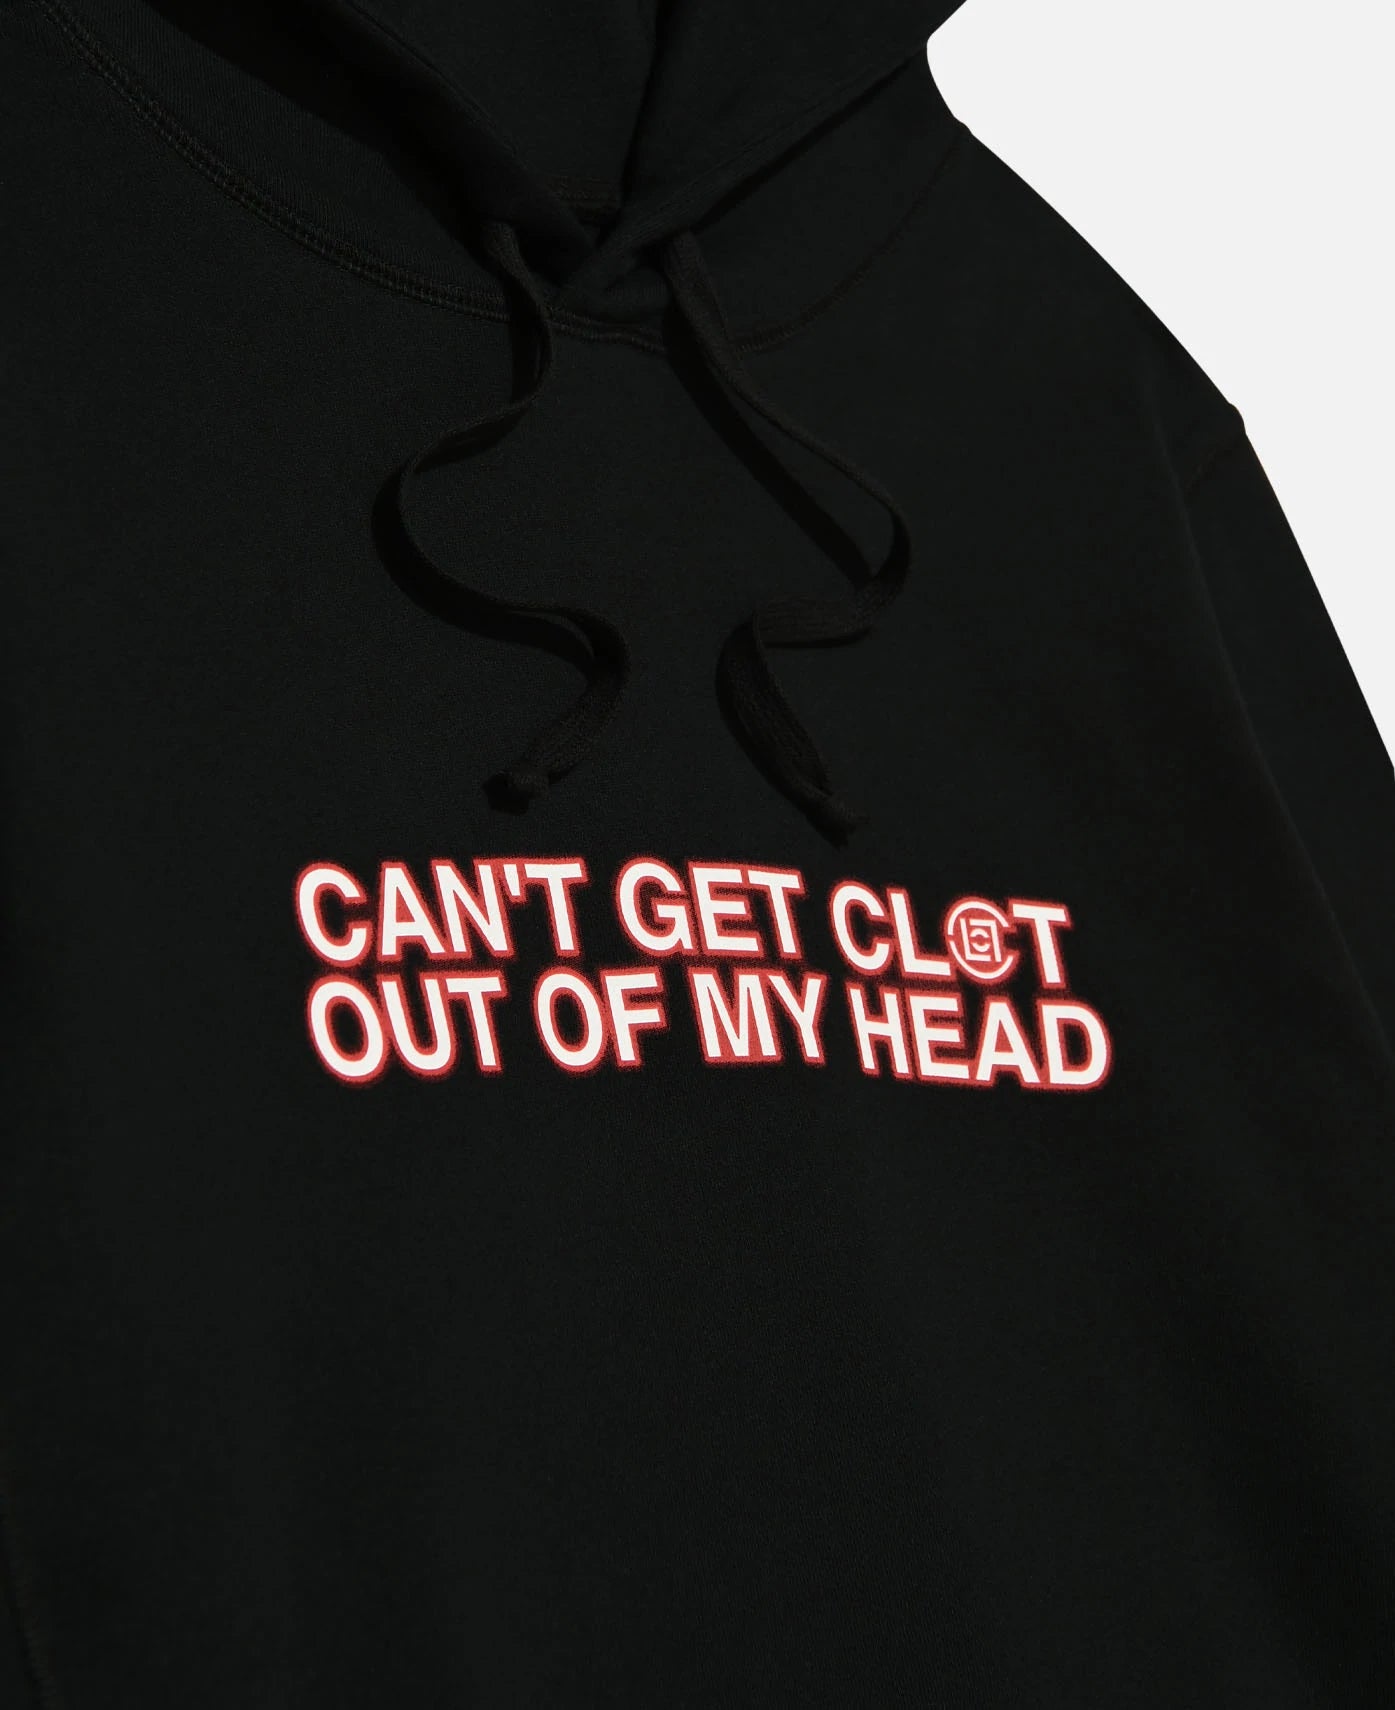 Can't Get CLOT Out Of My Head Hoodie - Locals Streetwear NZ